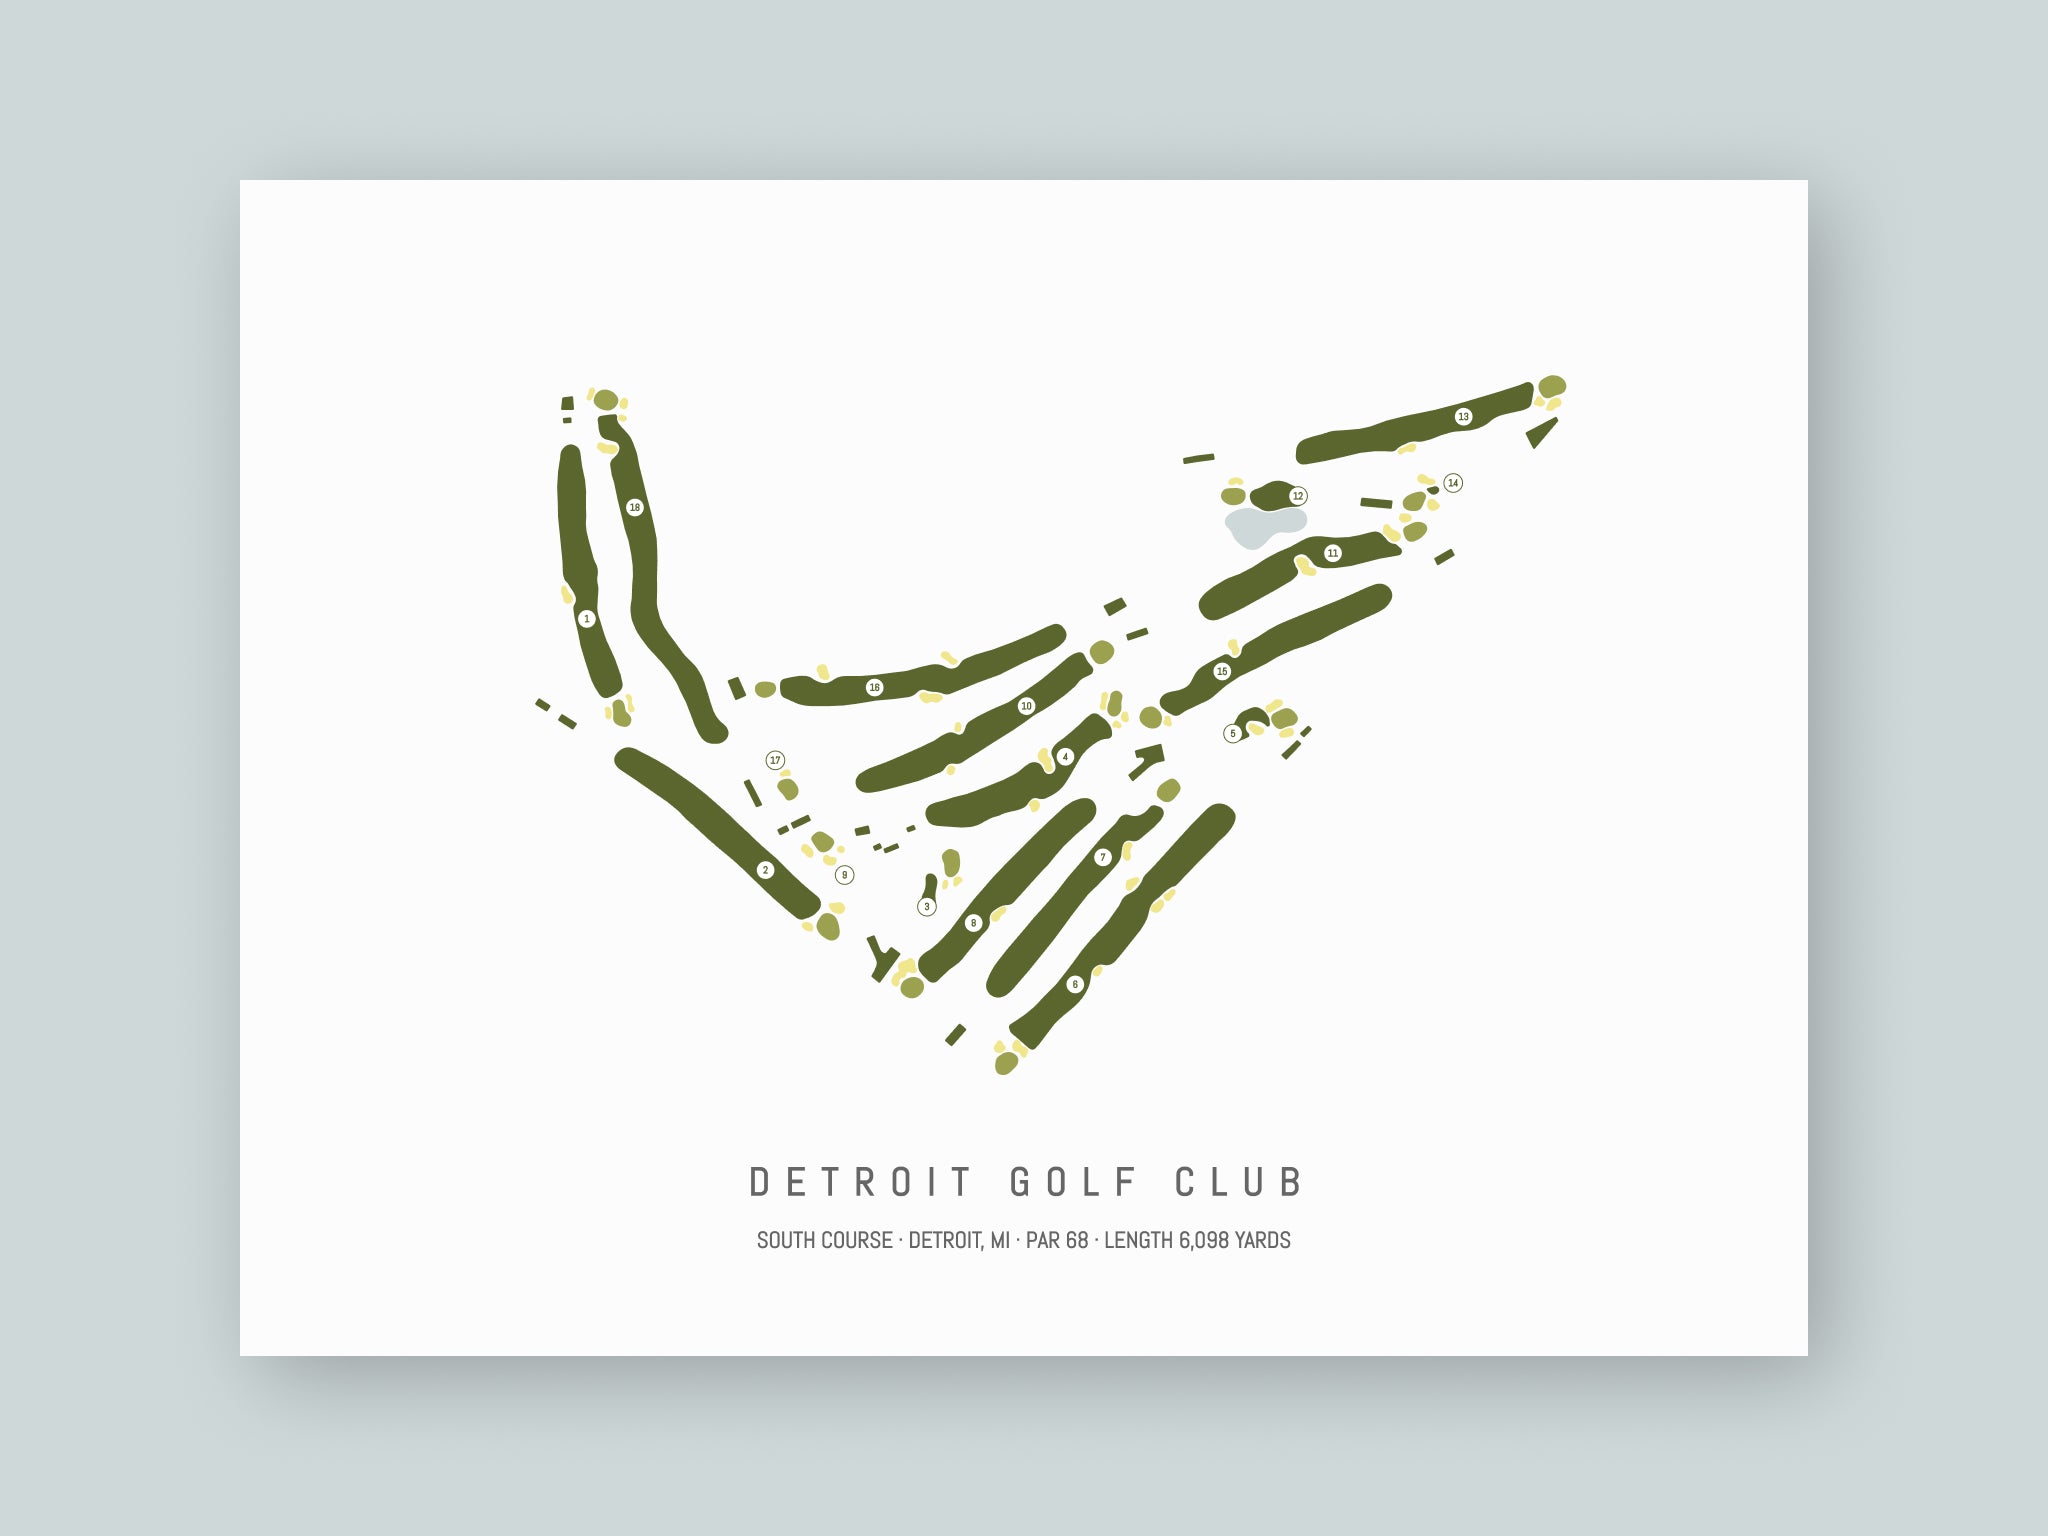 Detroit-Golf-Club-South-Course-MI--Unframed-24x18-With-Hole-Numbers